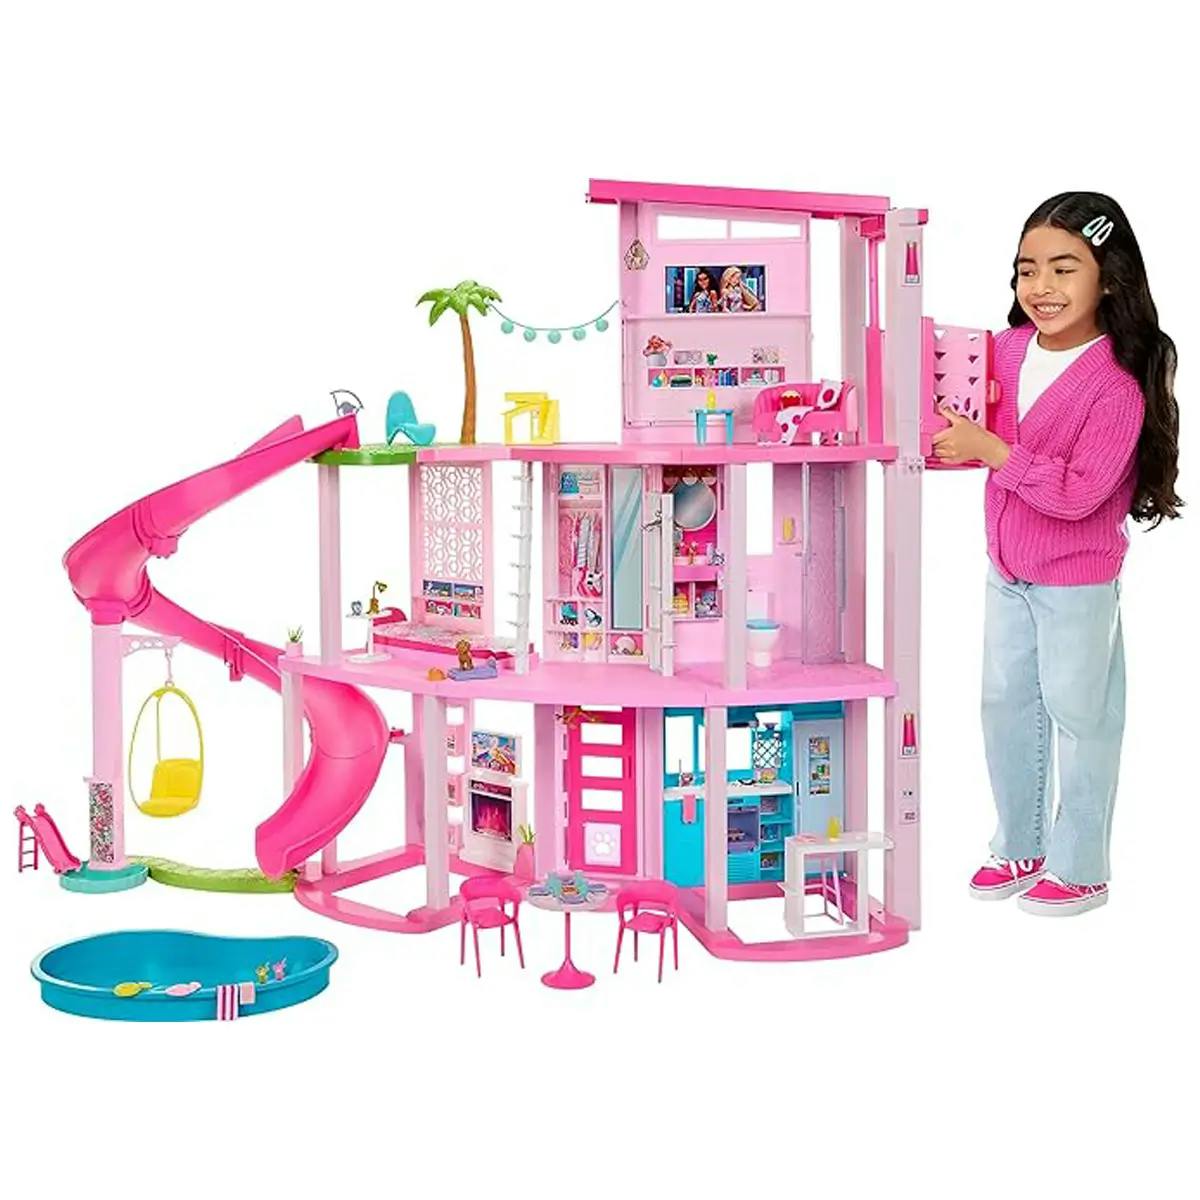 Young girl playing with Barbie Dreamhouse 2023, as shown in Barbie the Movie.